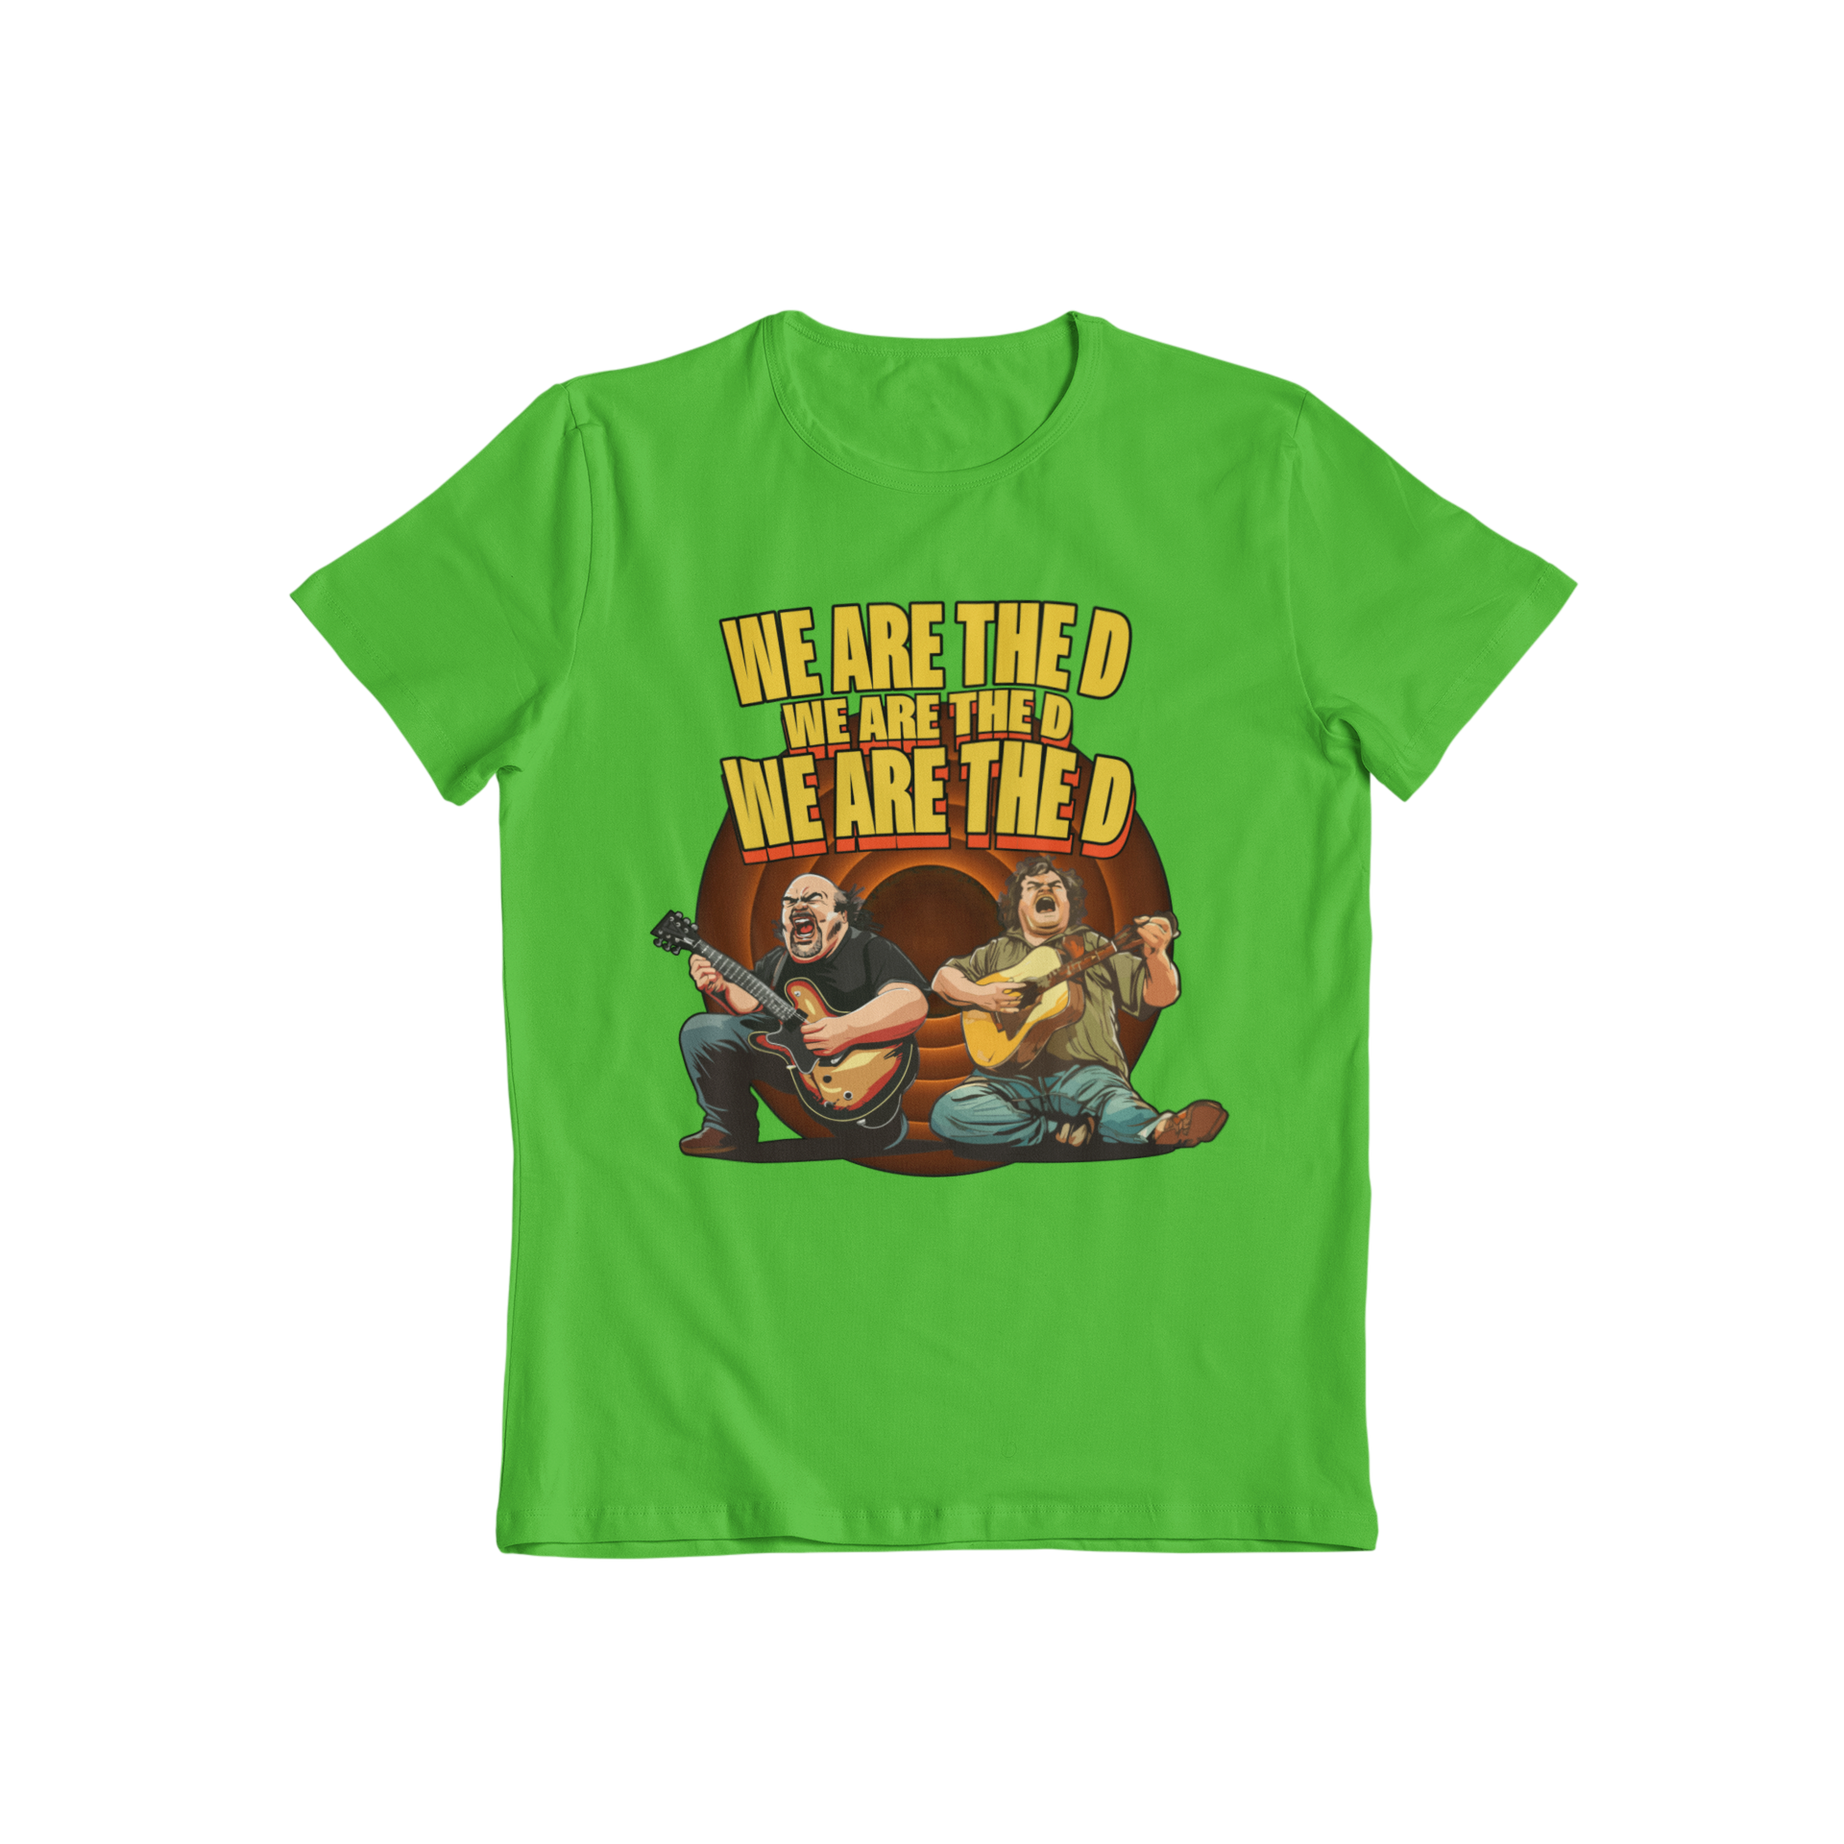 Rock on while paying homage to your favorite duo with our We Are The D t-shirt. This classic graphic tee is inspired by the legendary Tenacious D and is a must-have for any music lover. Show off your playful side with this quirky tee!